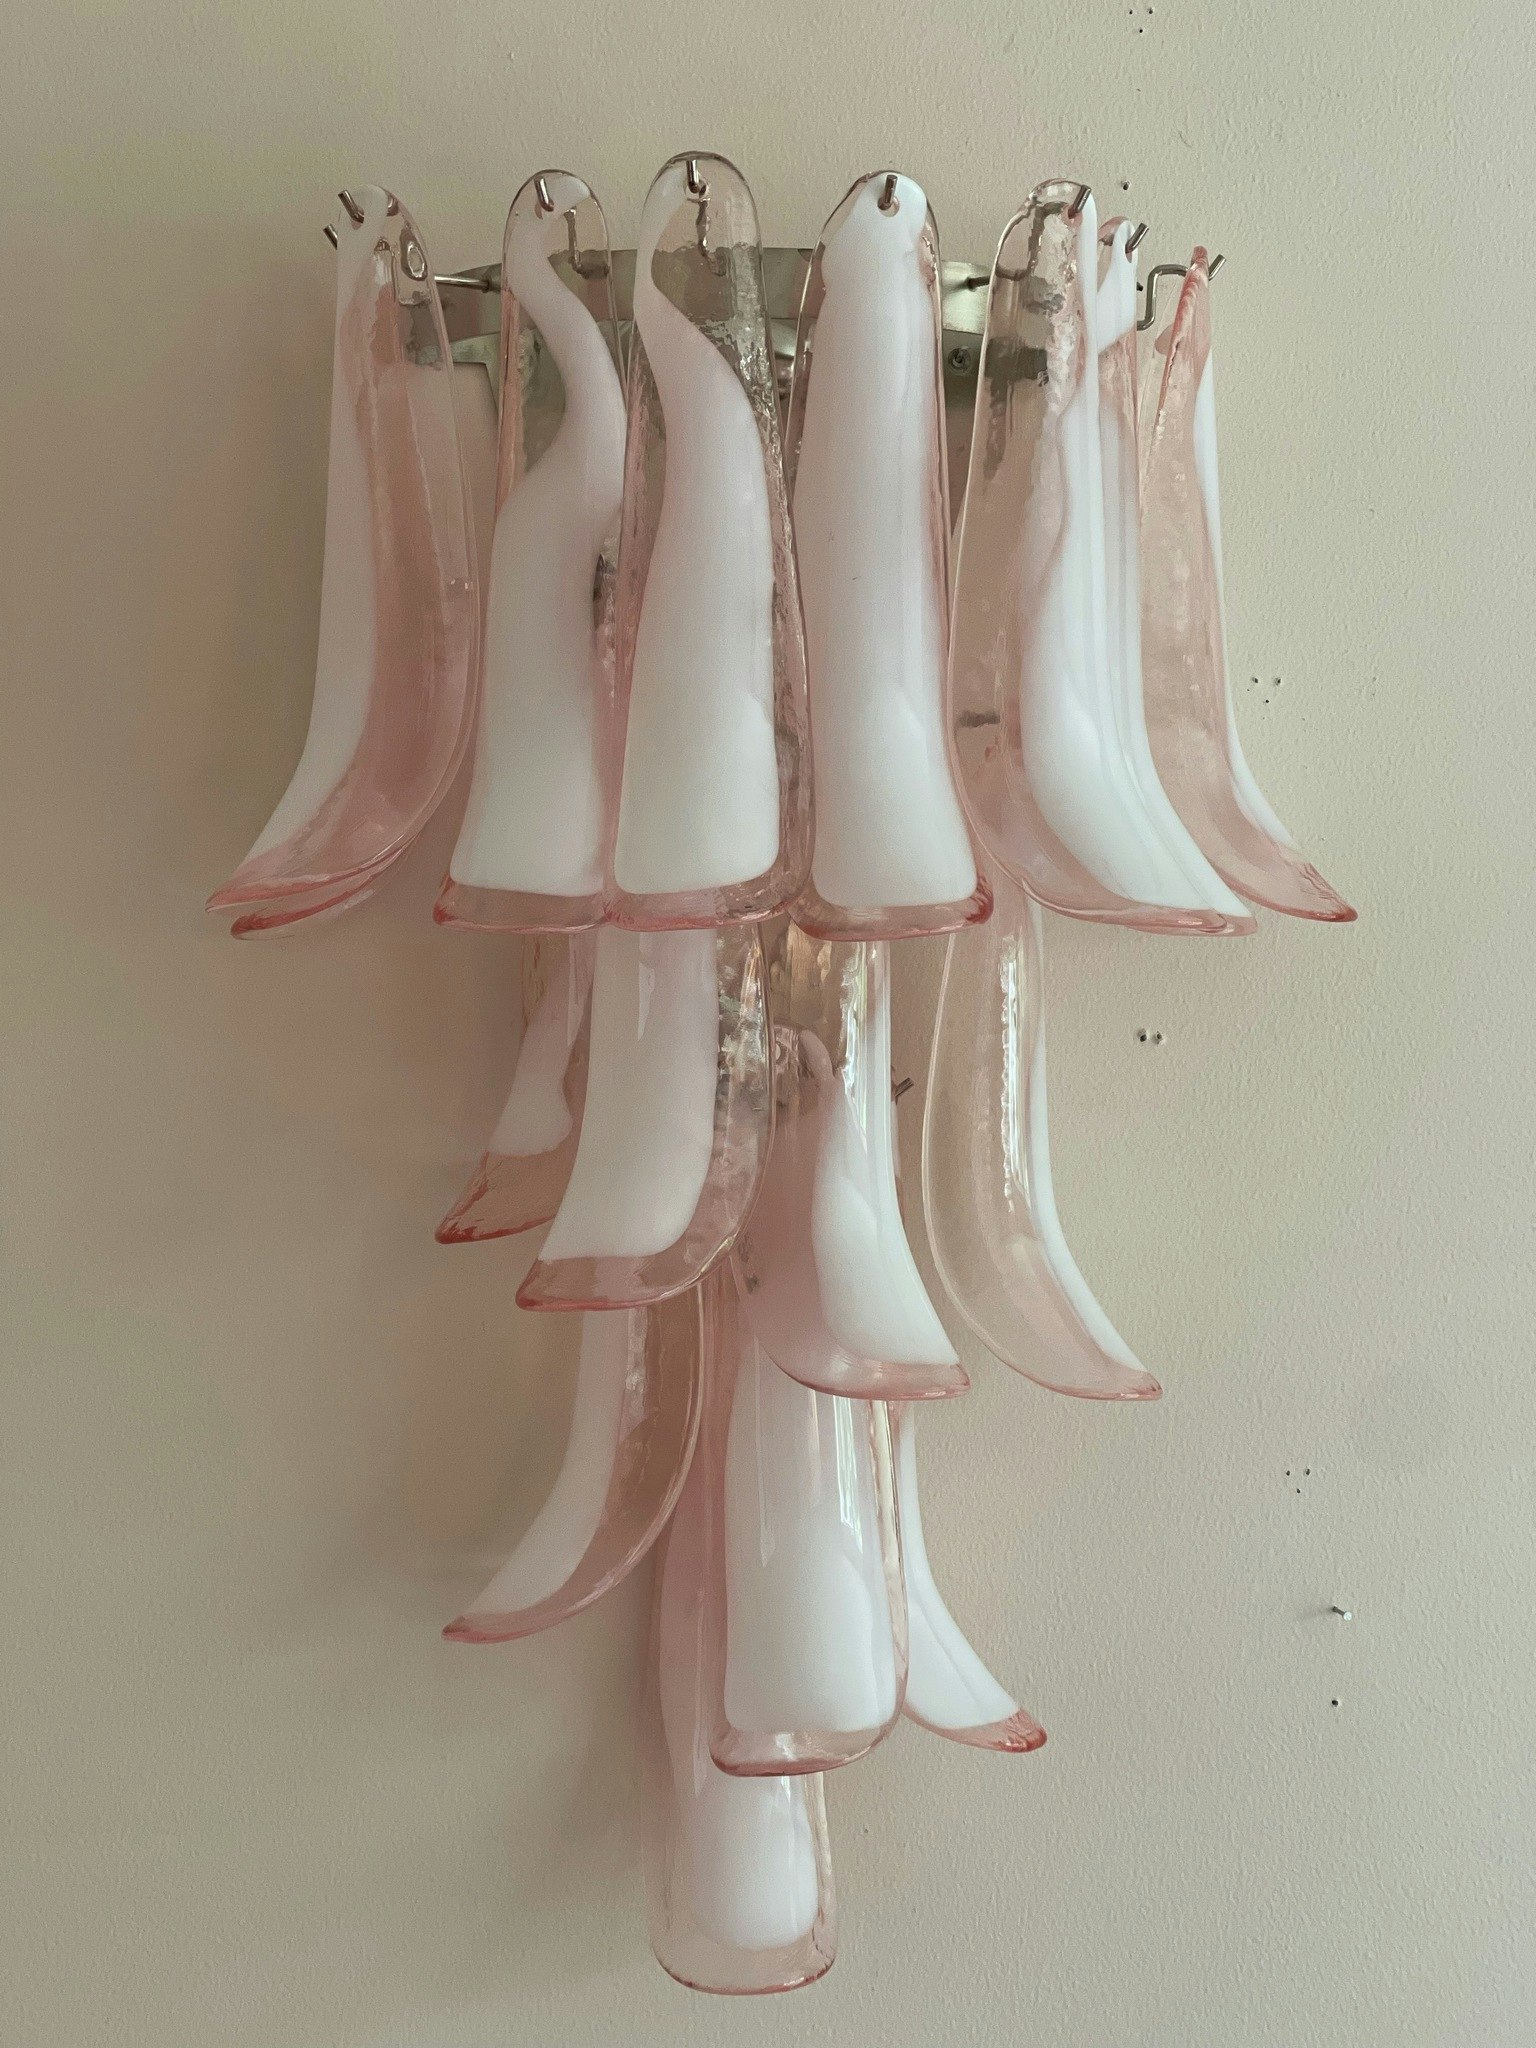 Pair of Murano Wall Lamps in pink.